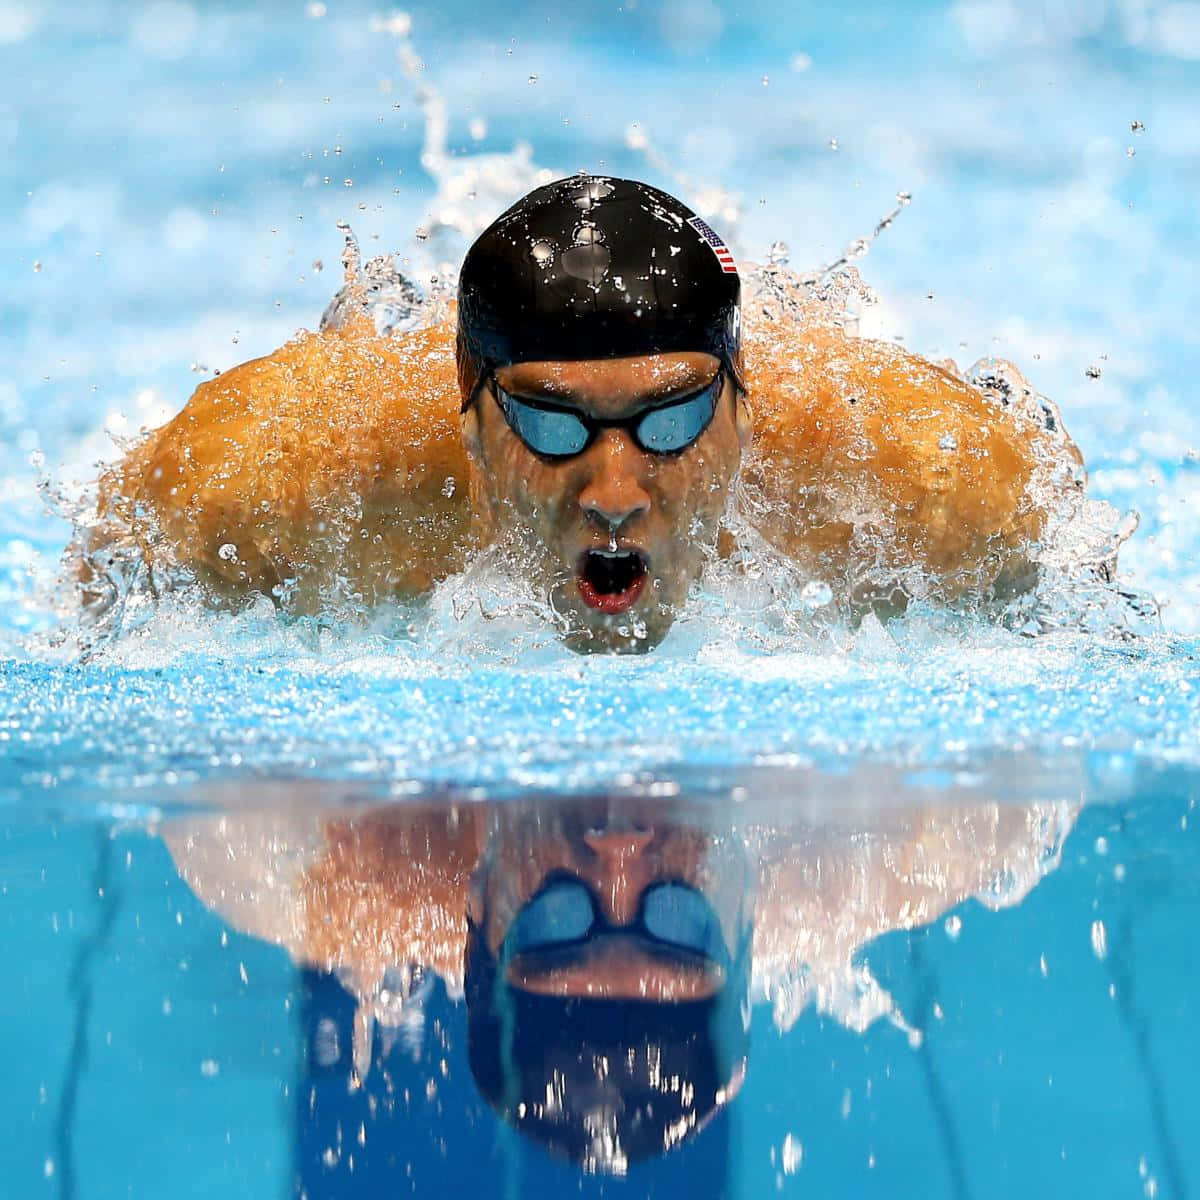 A Swimmer In The Water With Goggles On